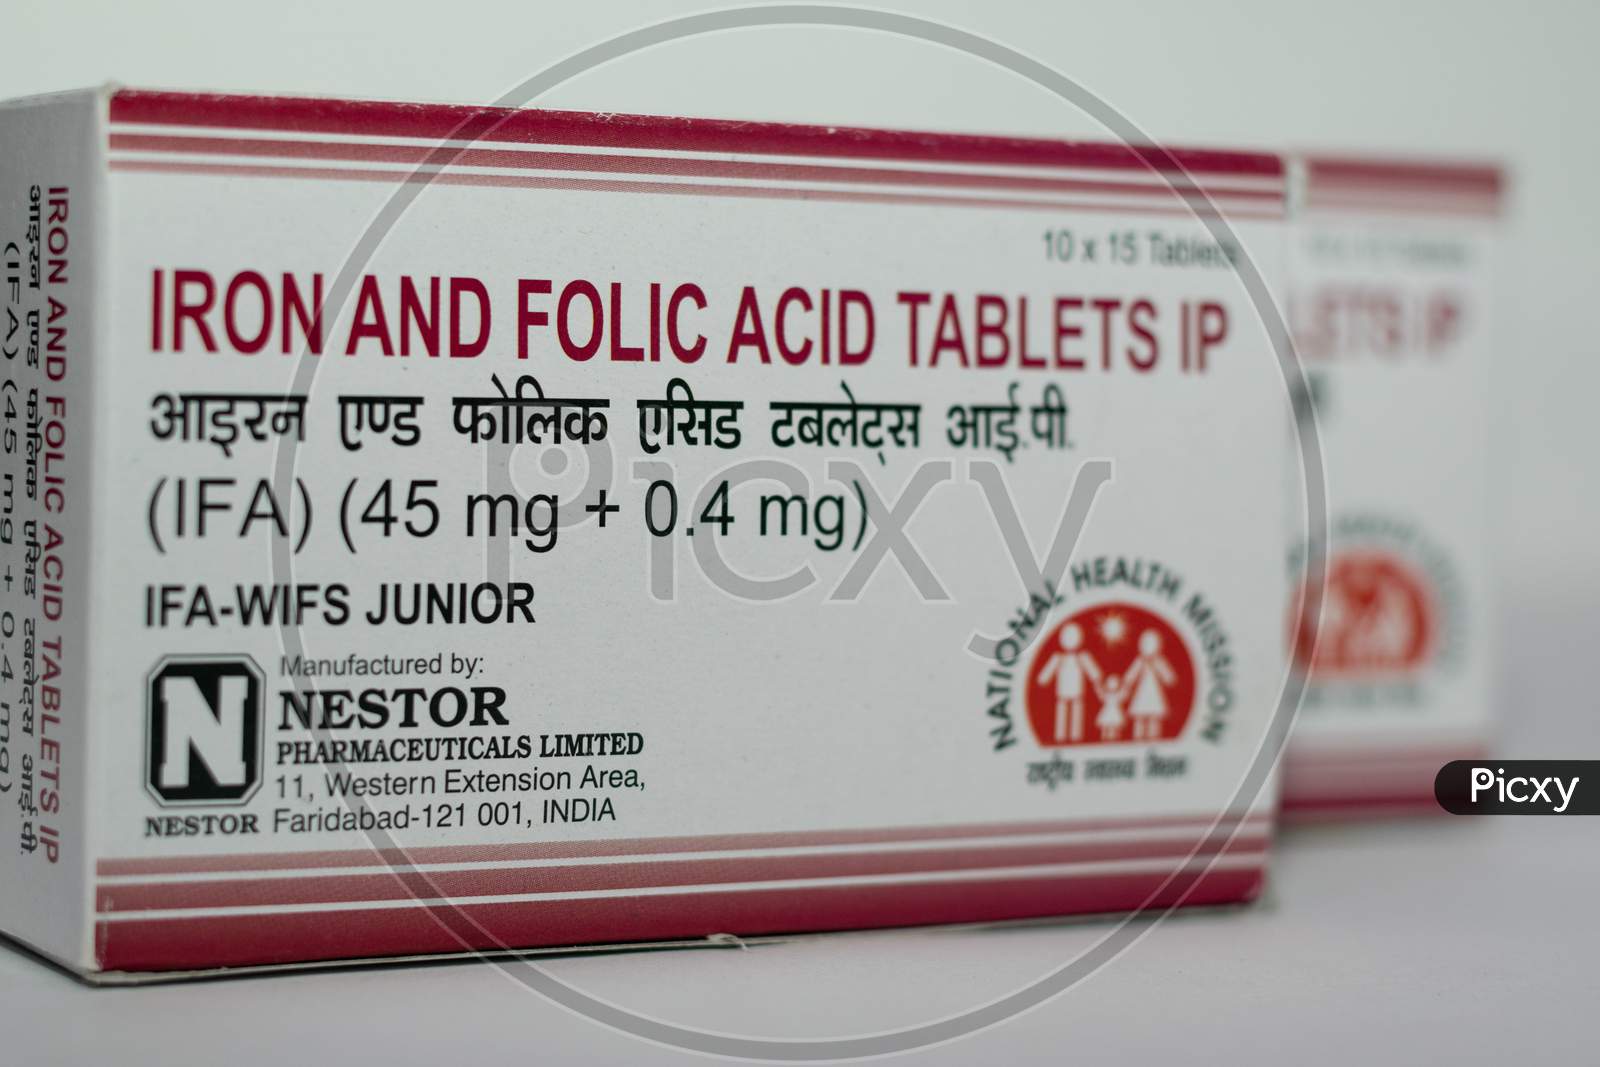 Iron and folic acid tablets provided free by government To reduce the prevalence and severity of anaemia in population (5-10 years)